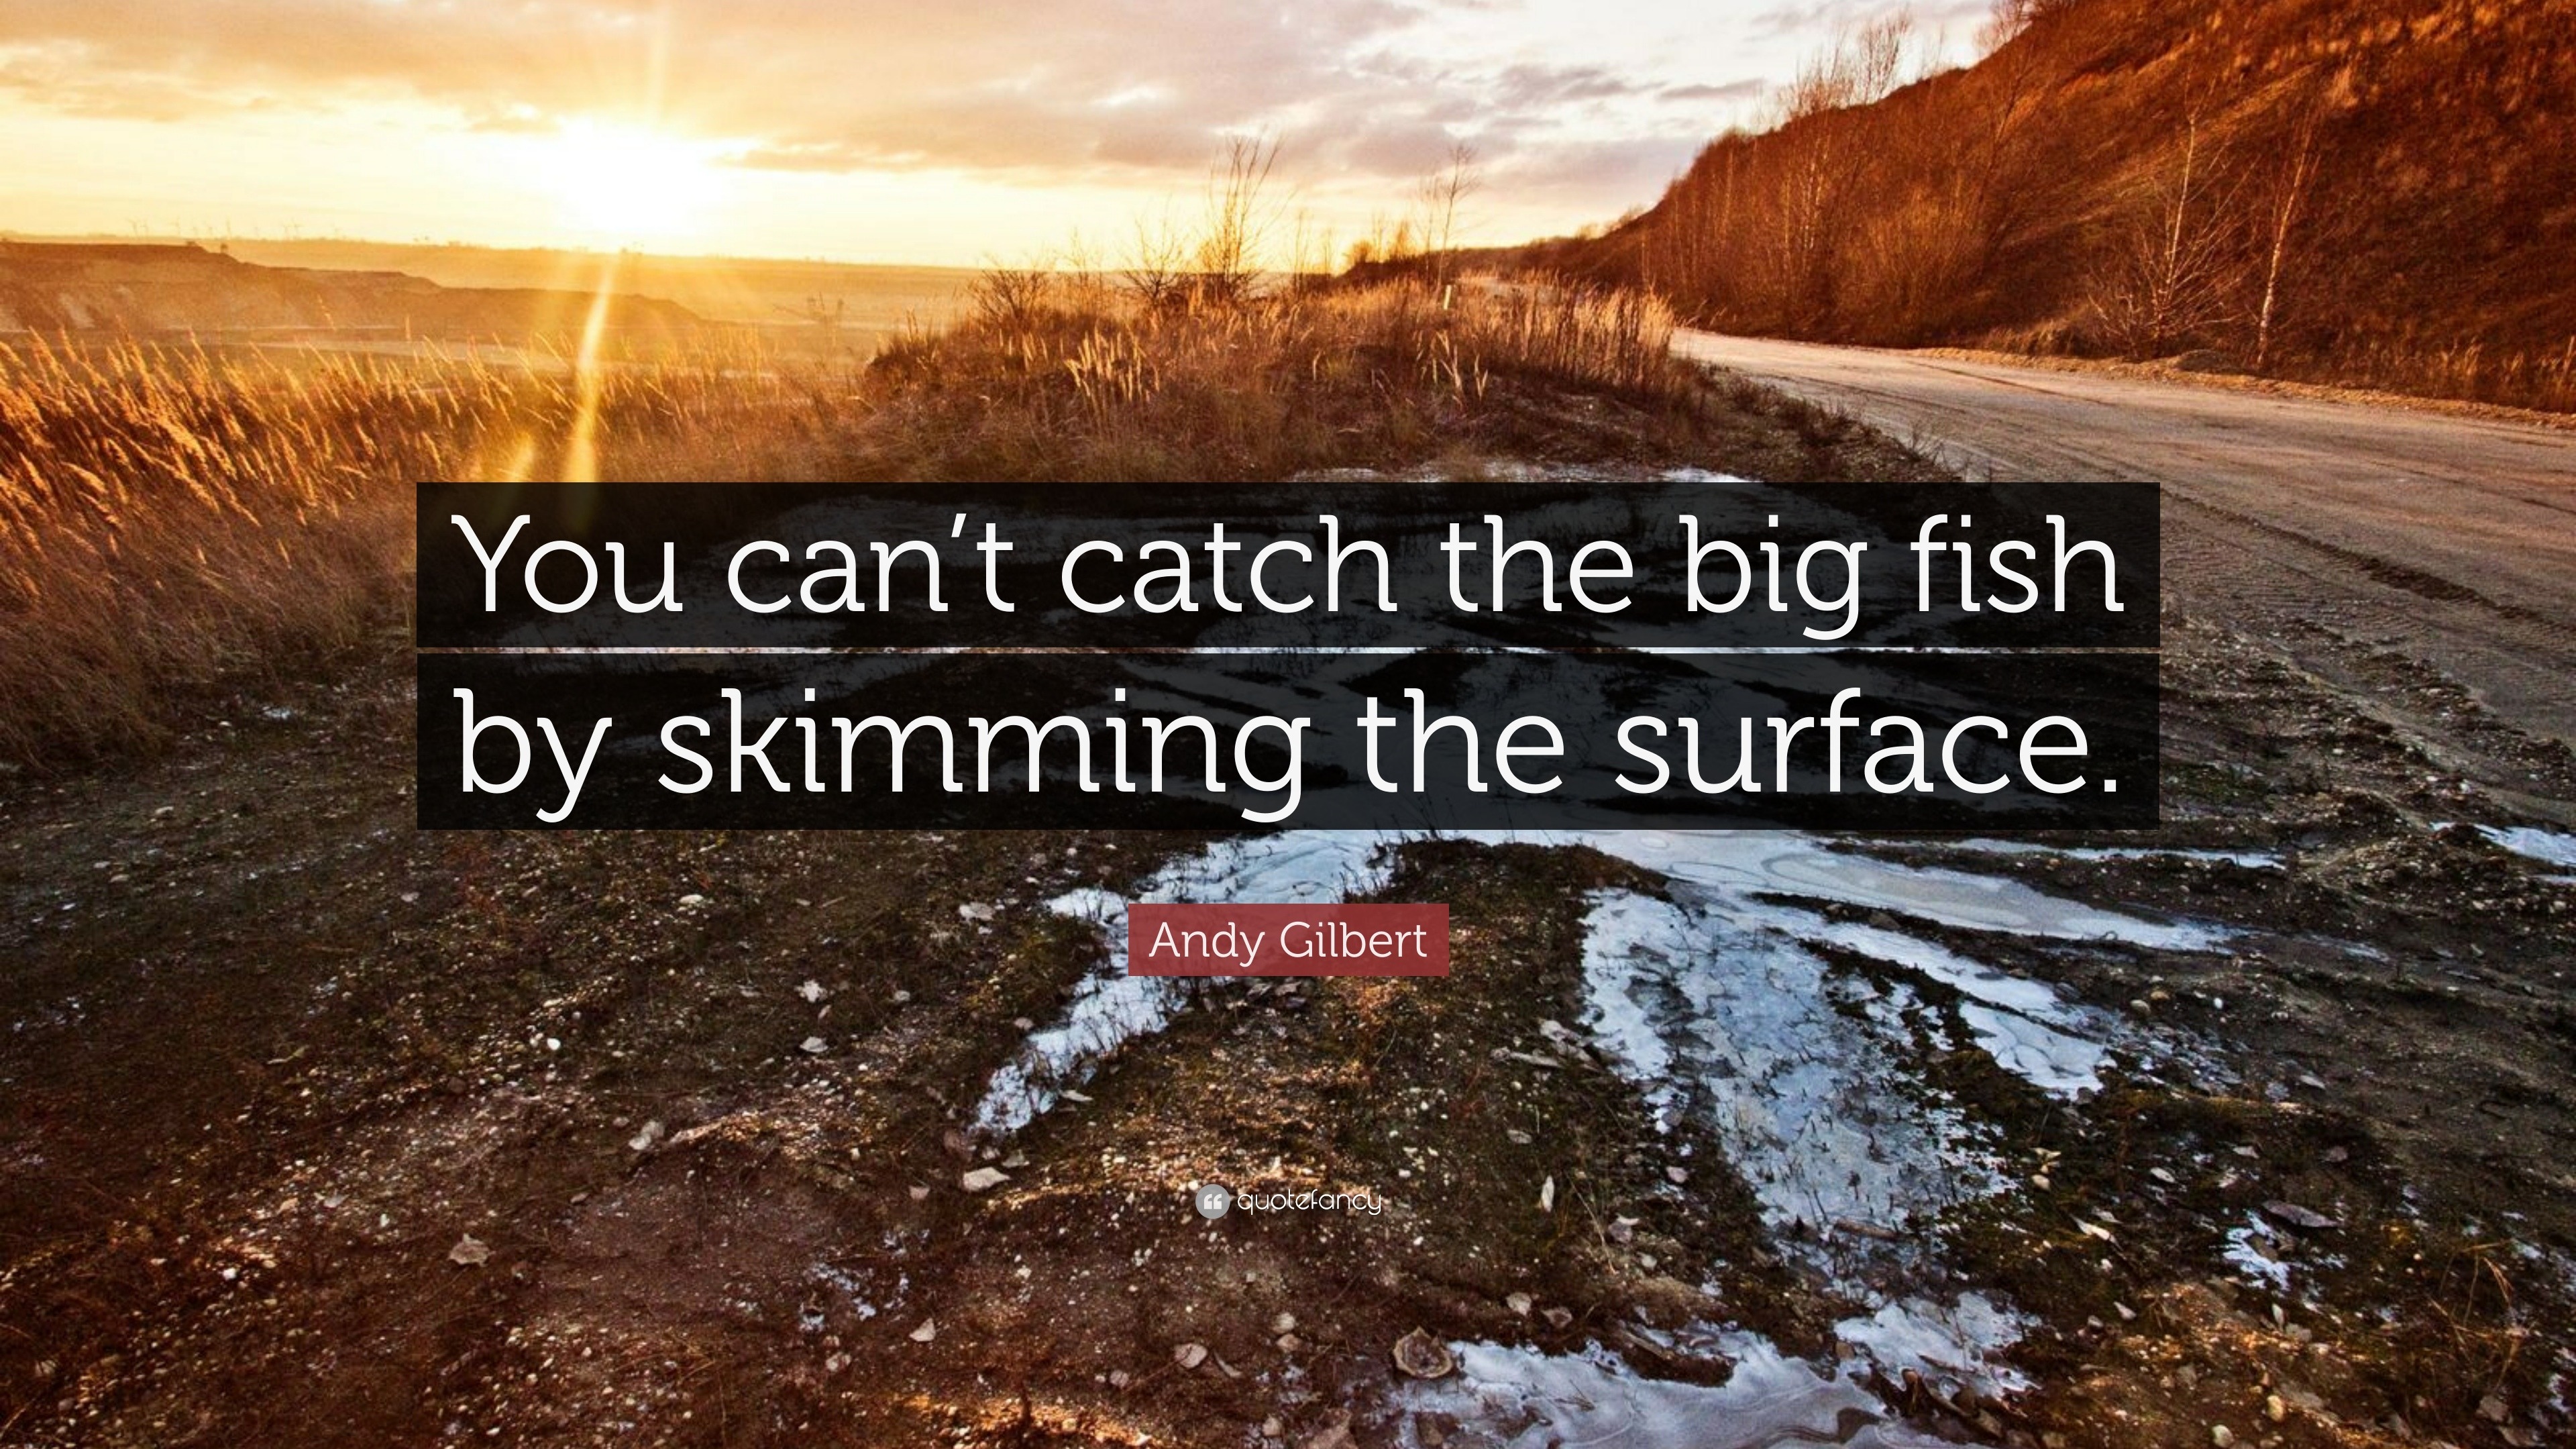 Andy Gilbert quote: You can't catch the big fish by skimming the surface.